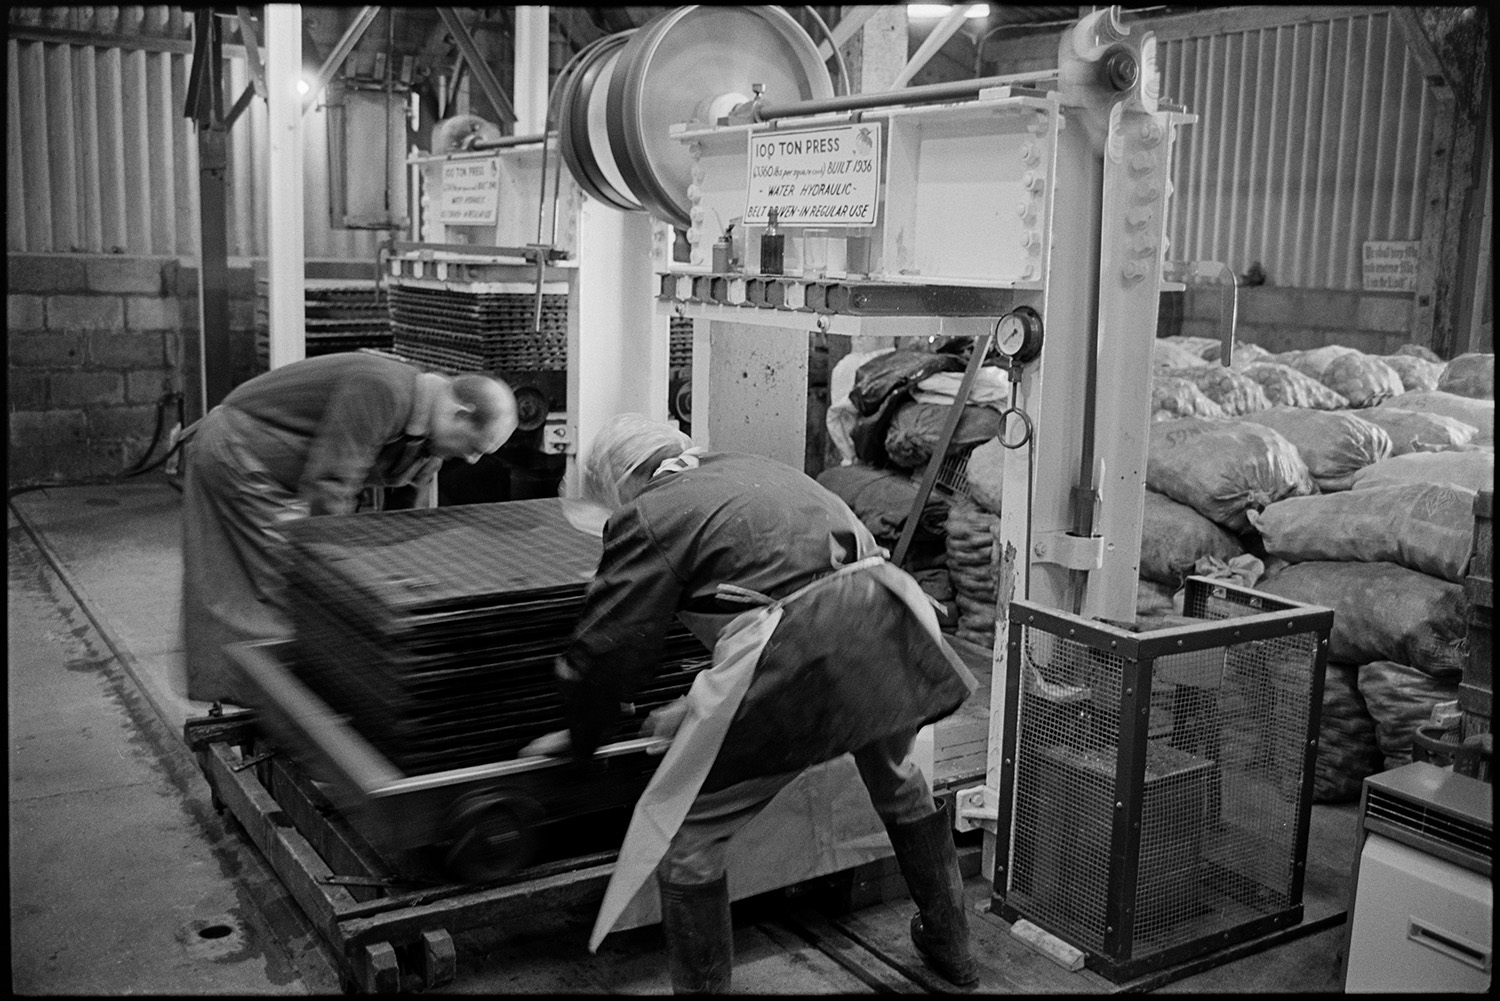 Cider making, men operating cider press in factory. 
[Two men working with a 100 ton cider press built in 1936, at Hancock's cider factory at Clapworthy Mill, South Molton. Sacks of apples can be seen stacked in the background.]